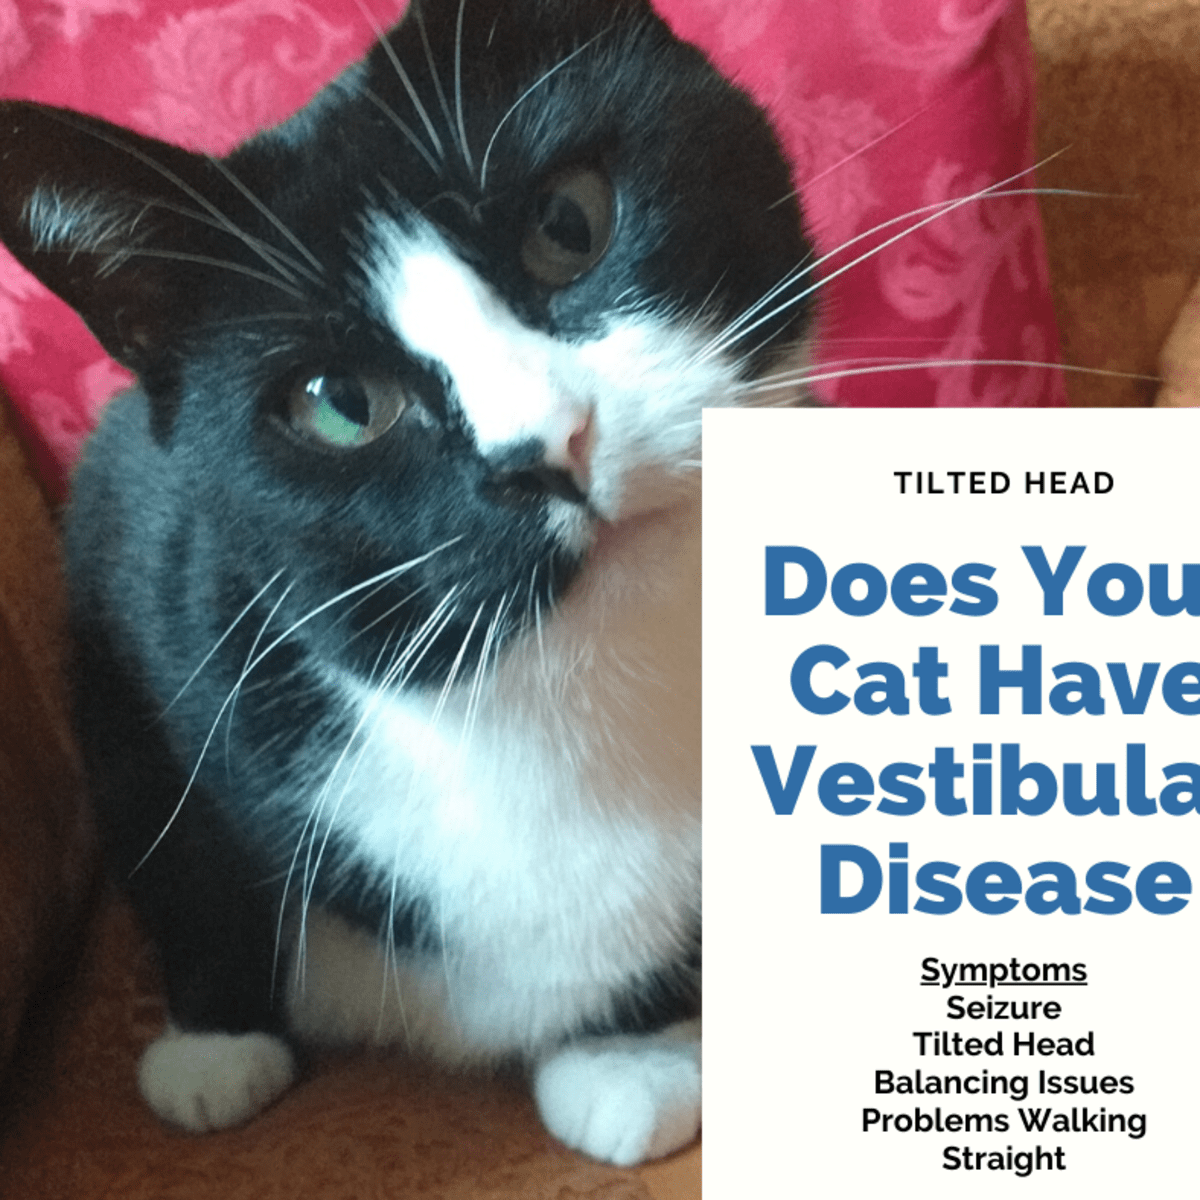 Symptoms And Treatment For Vestibular Disease In Cats Pethelpful By Fellow Animal Lovers And Experts